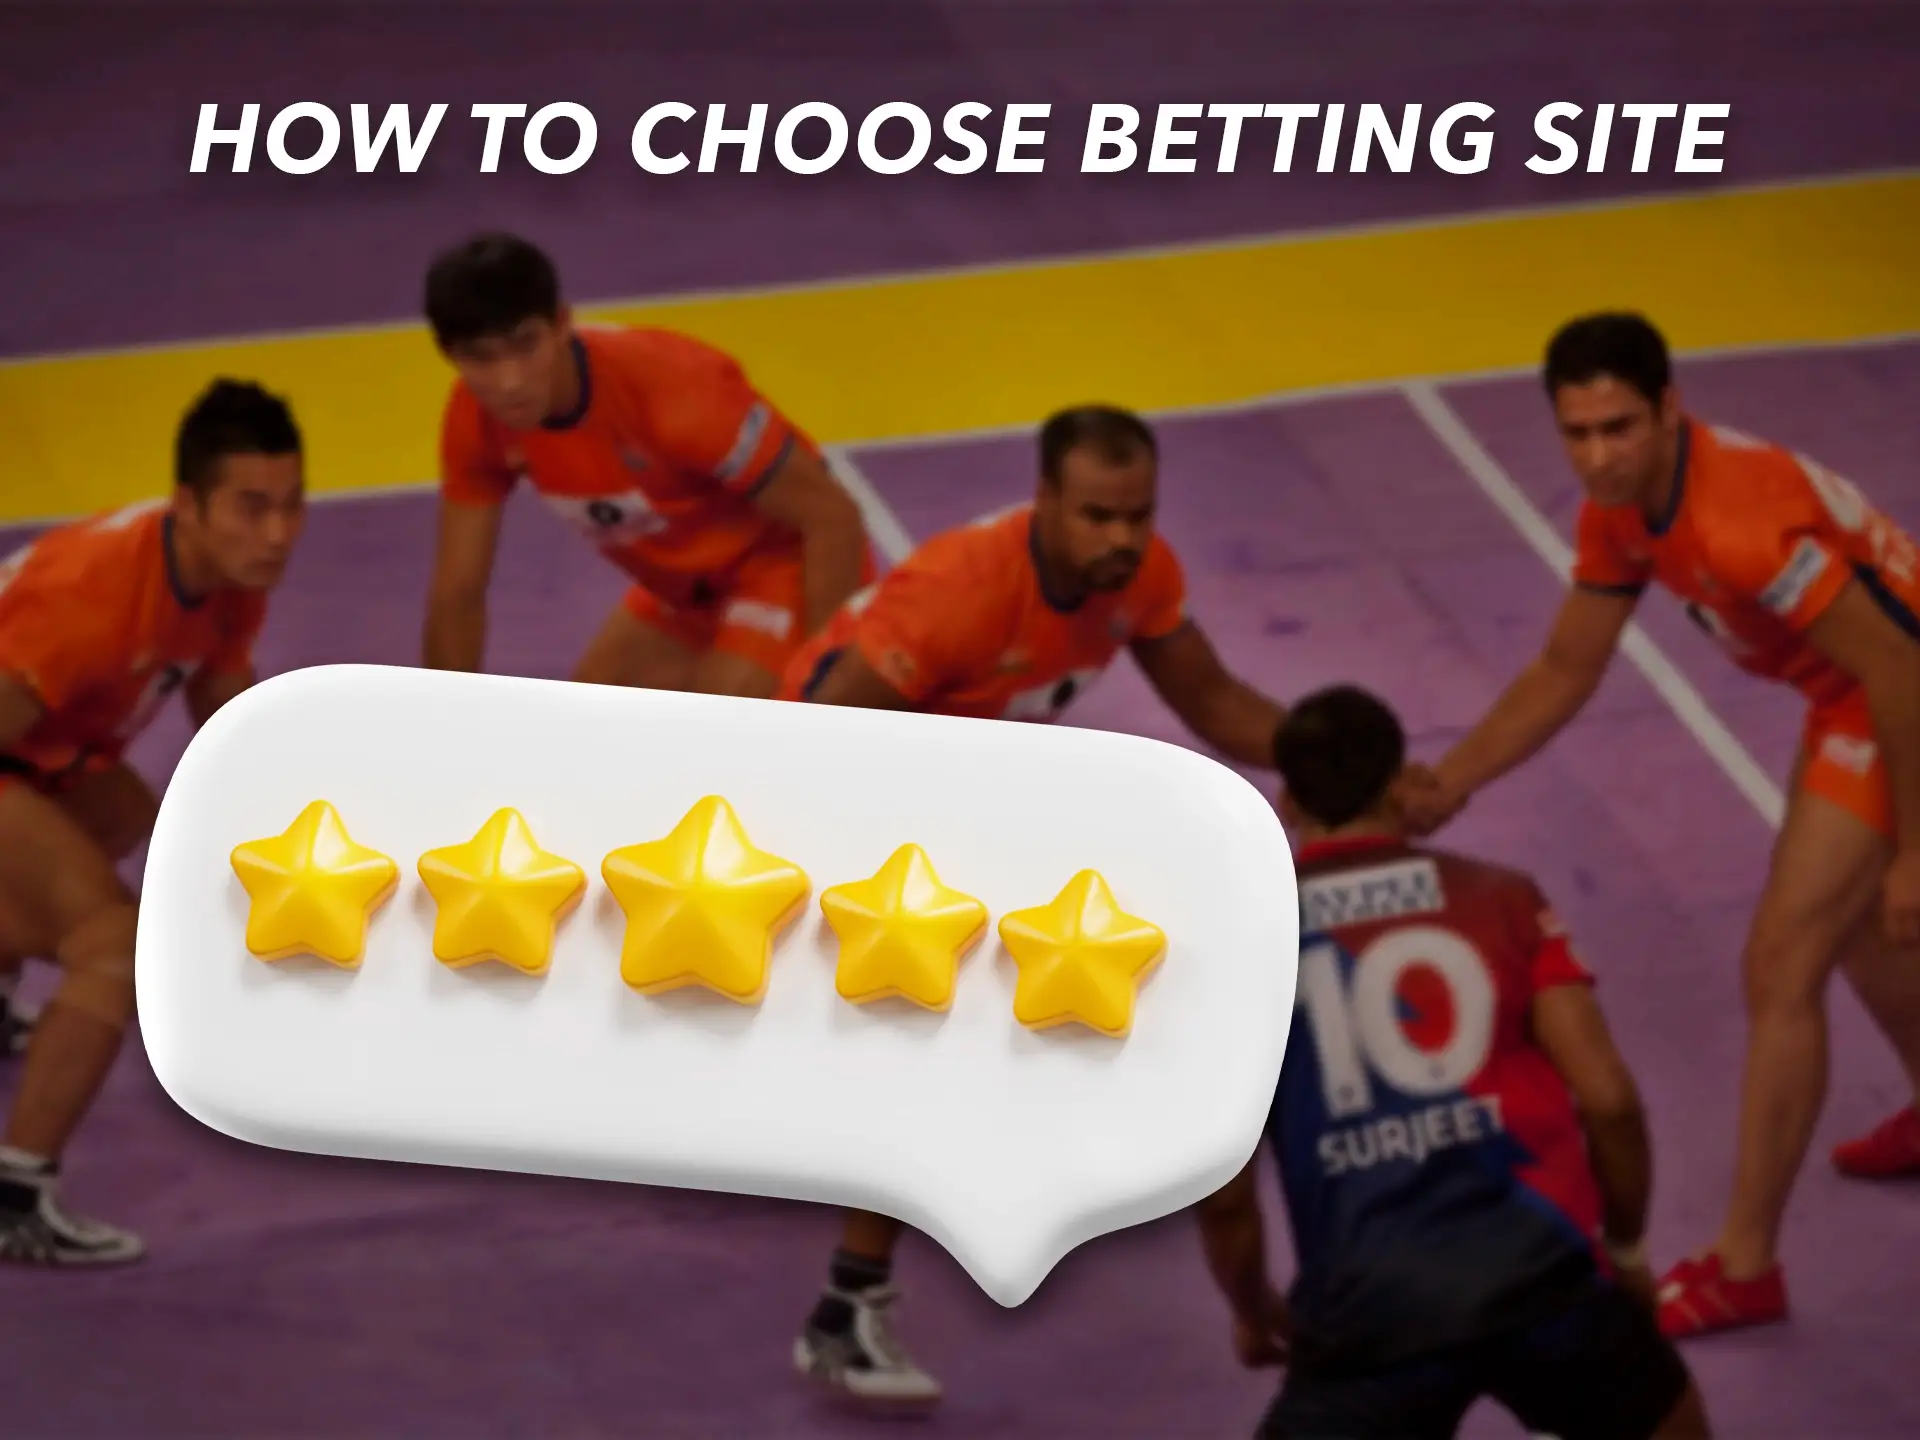 Reviews and feedback from sportbettingindia will help you choose the best bookmaker to bet on Kabaddi.